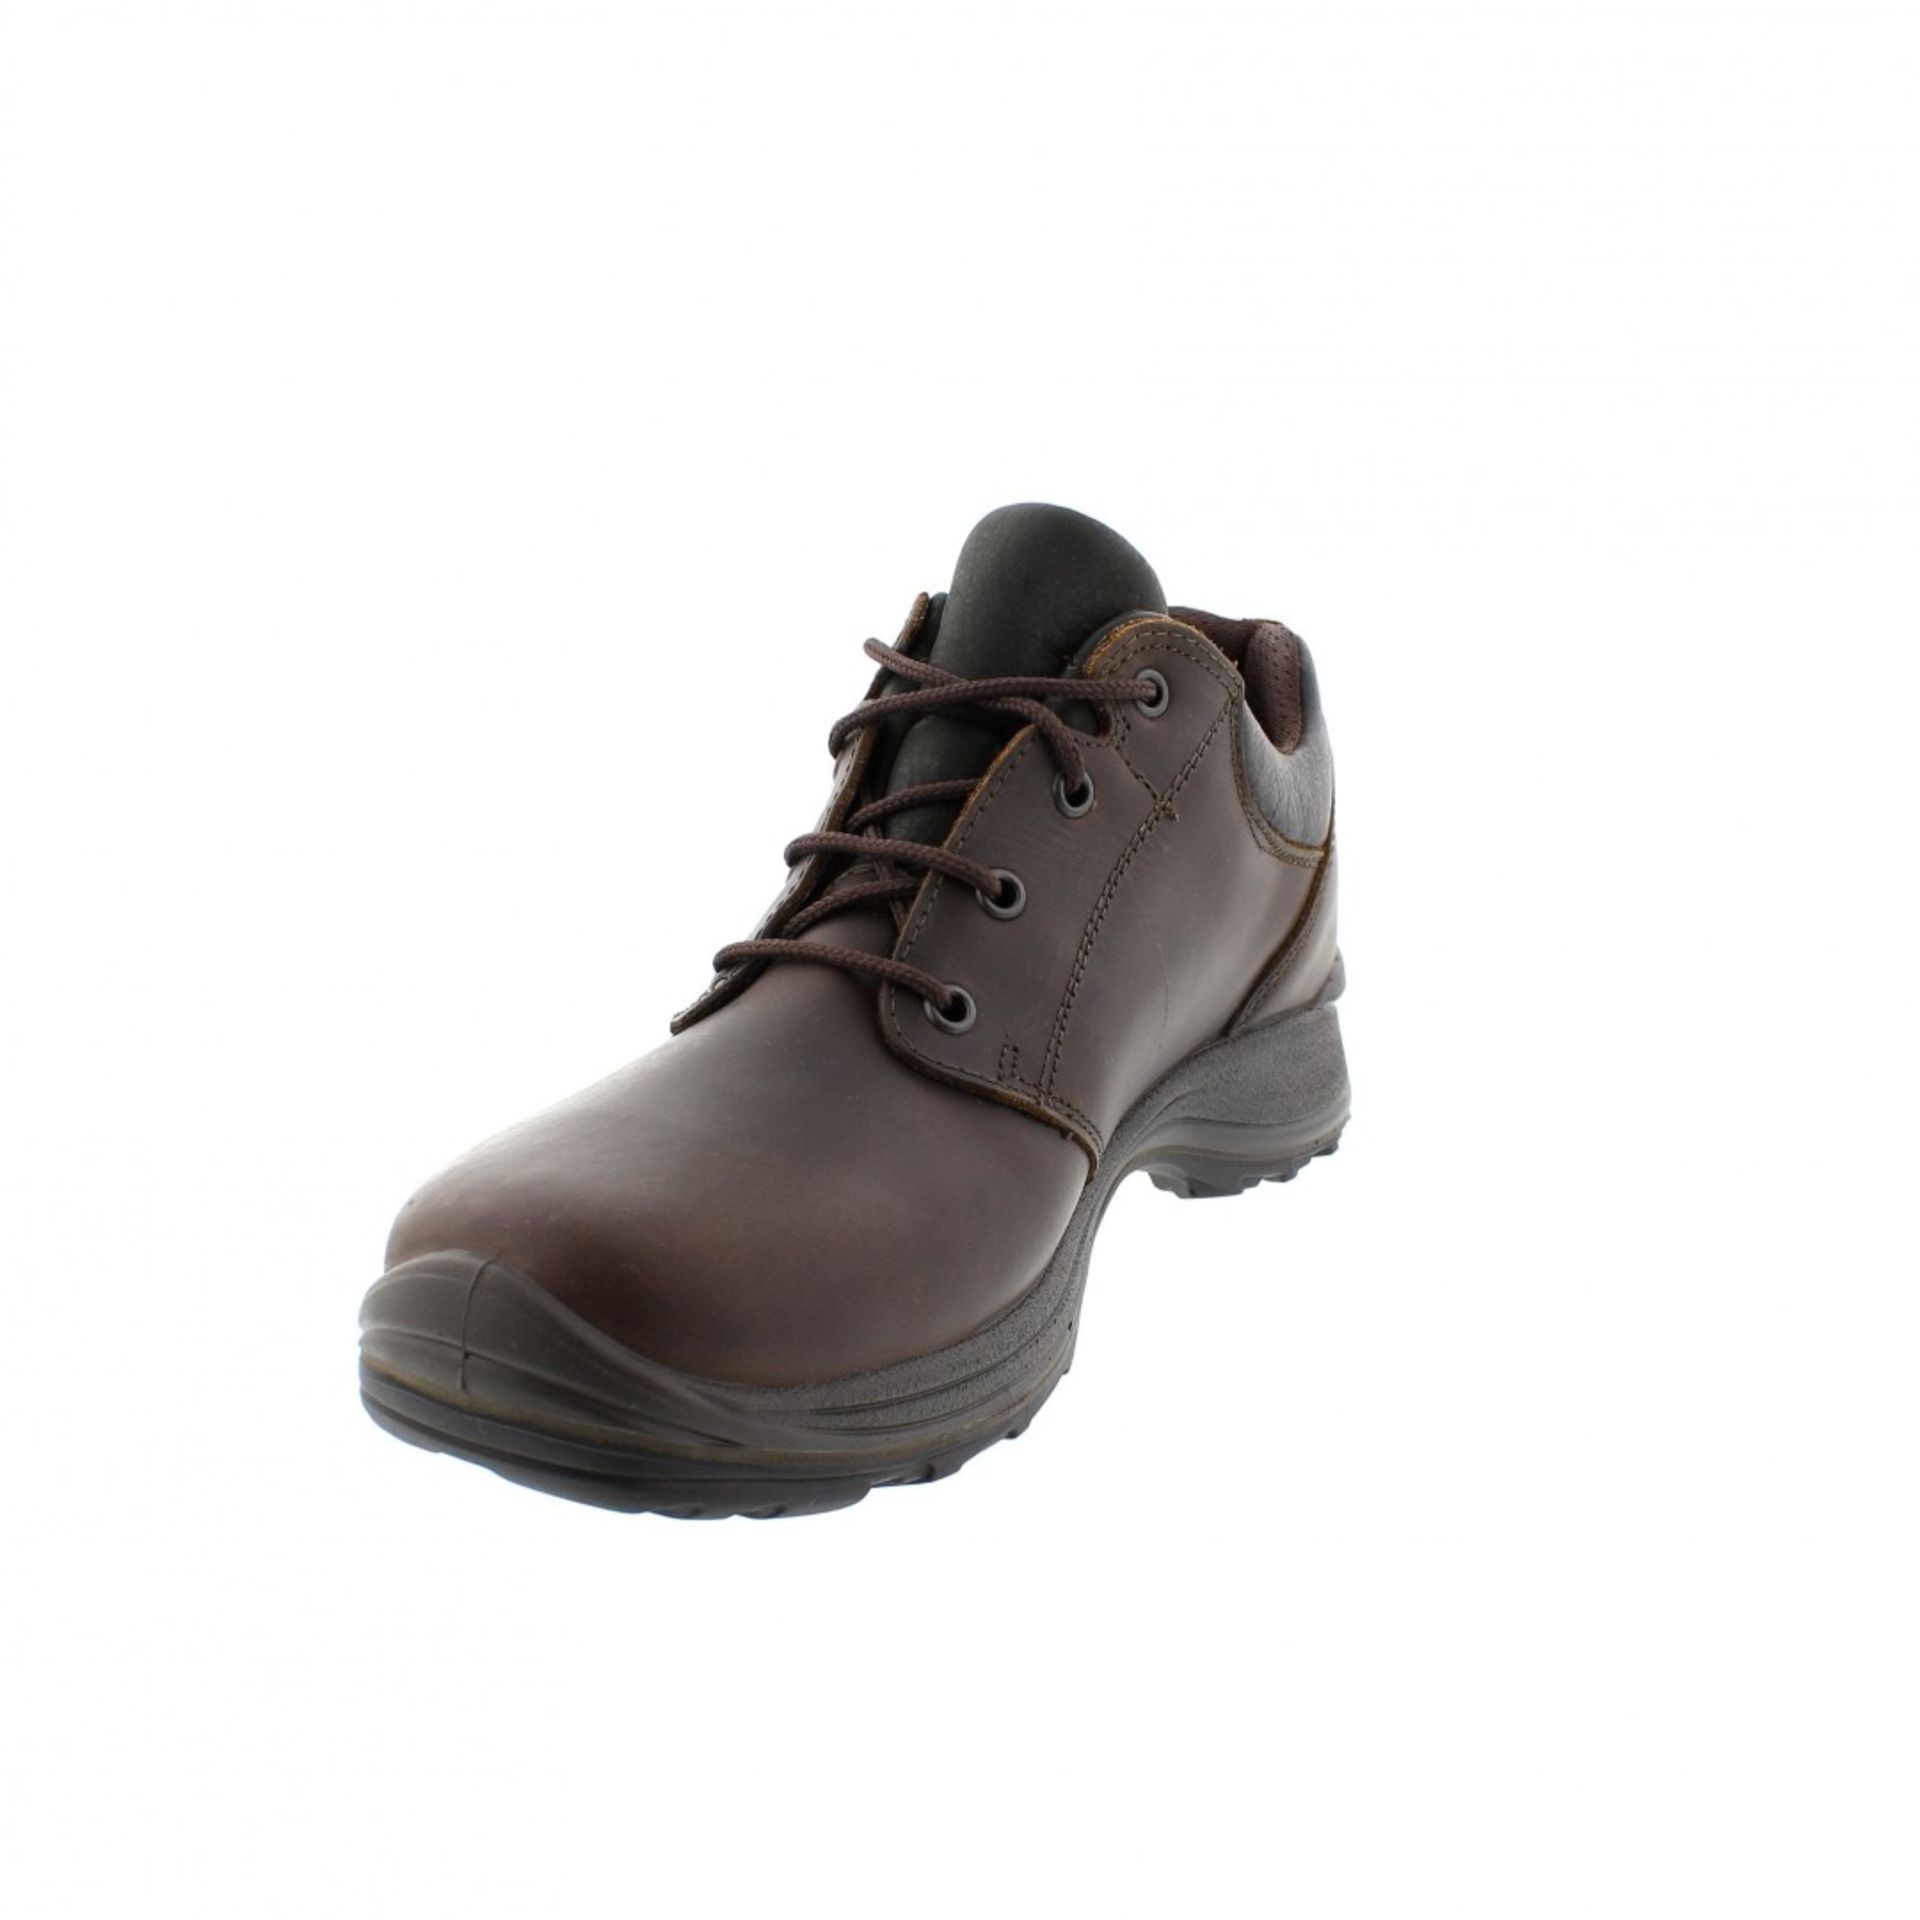 1 x Pair of Men's Grisport Brown Leather GriTex Shoes - Rogerson Footwear - Brand New and Boxed - - Image 9 of 9